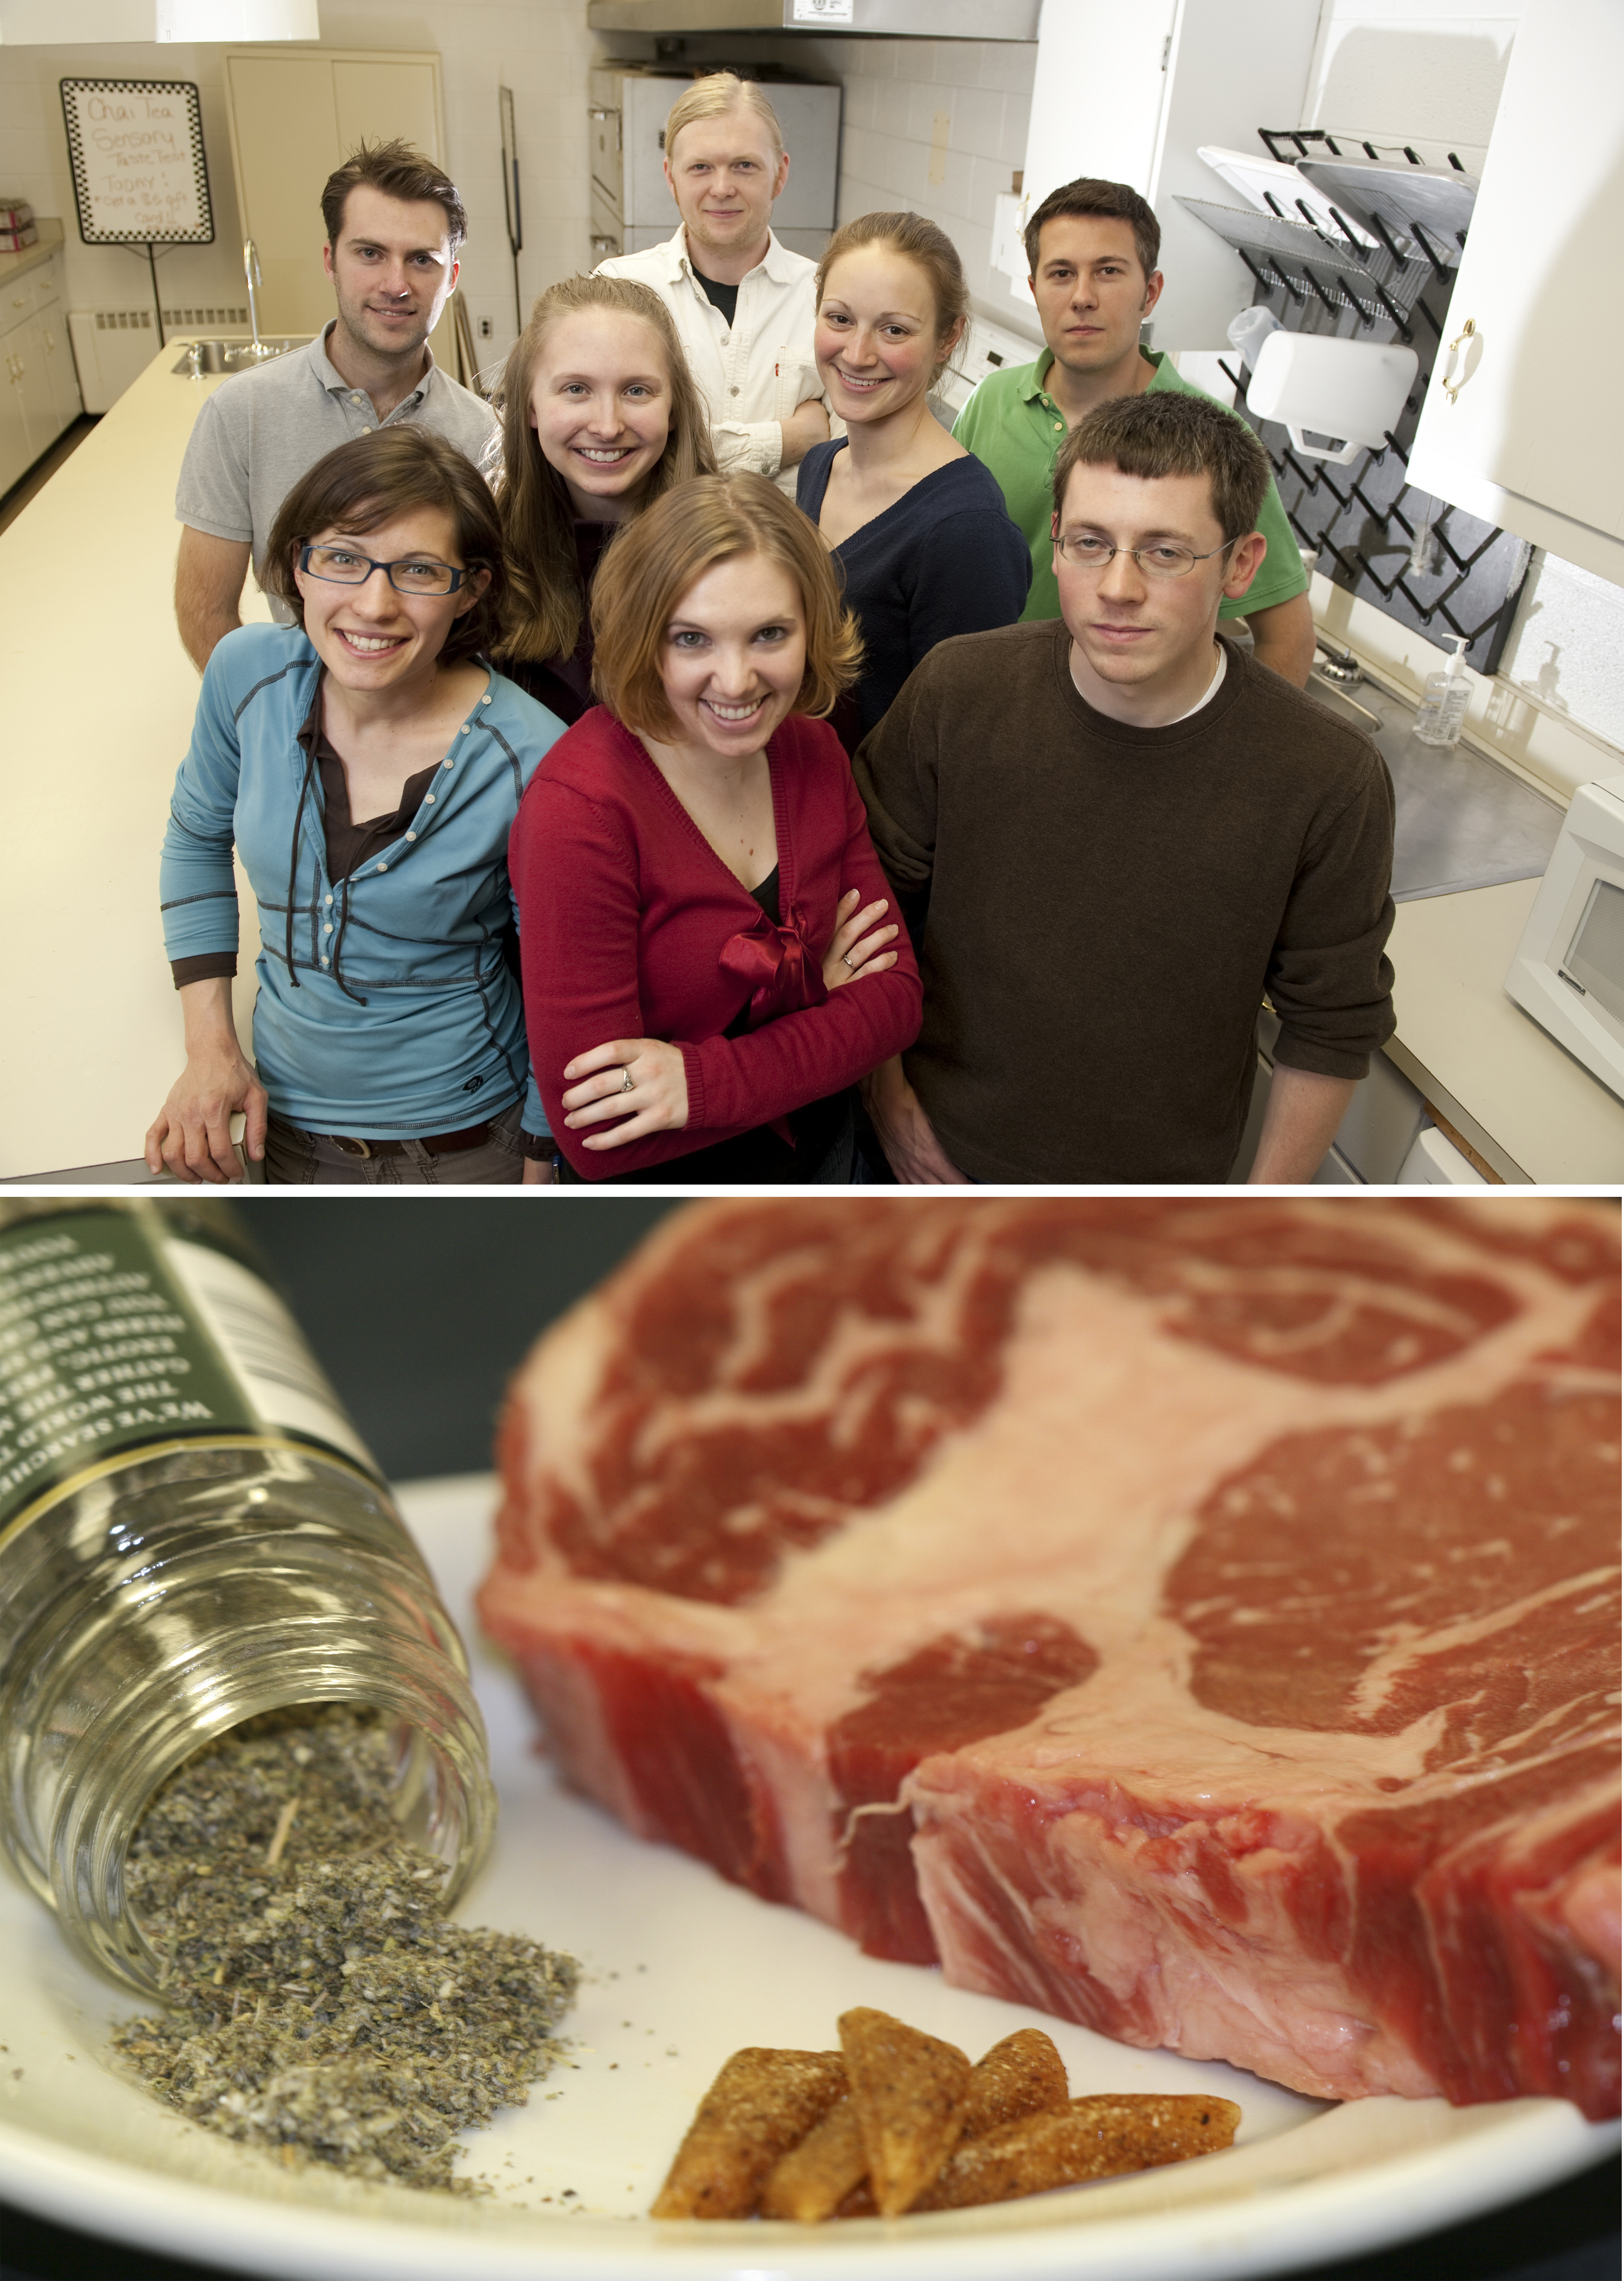 Members of the Virginia Tech Food Science and Technology Team 